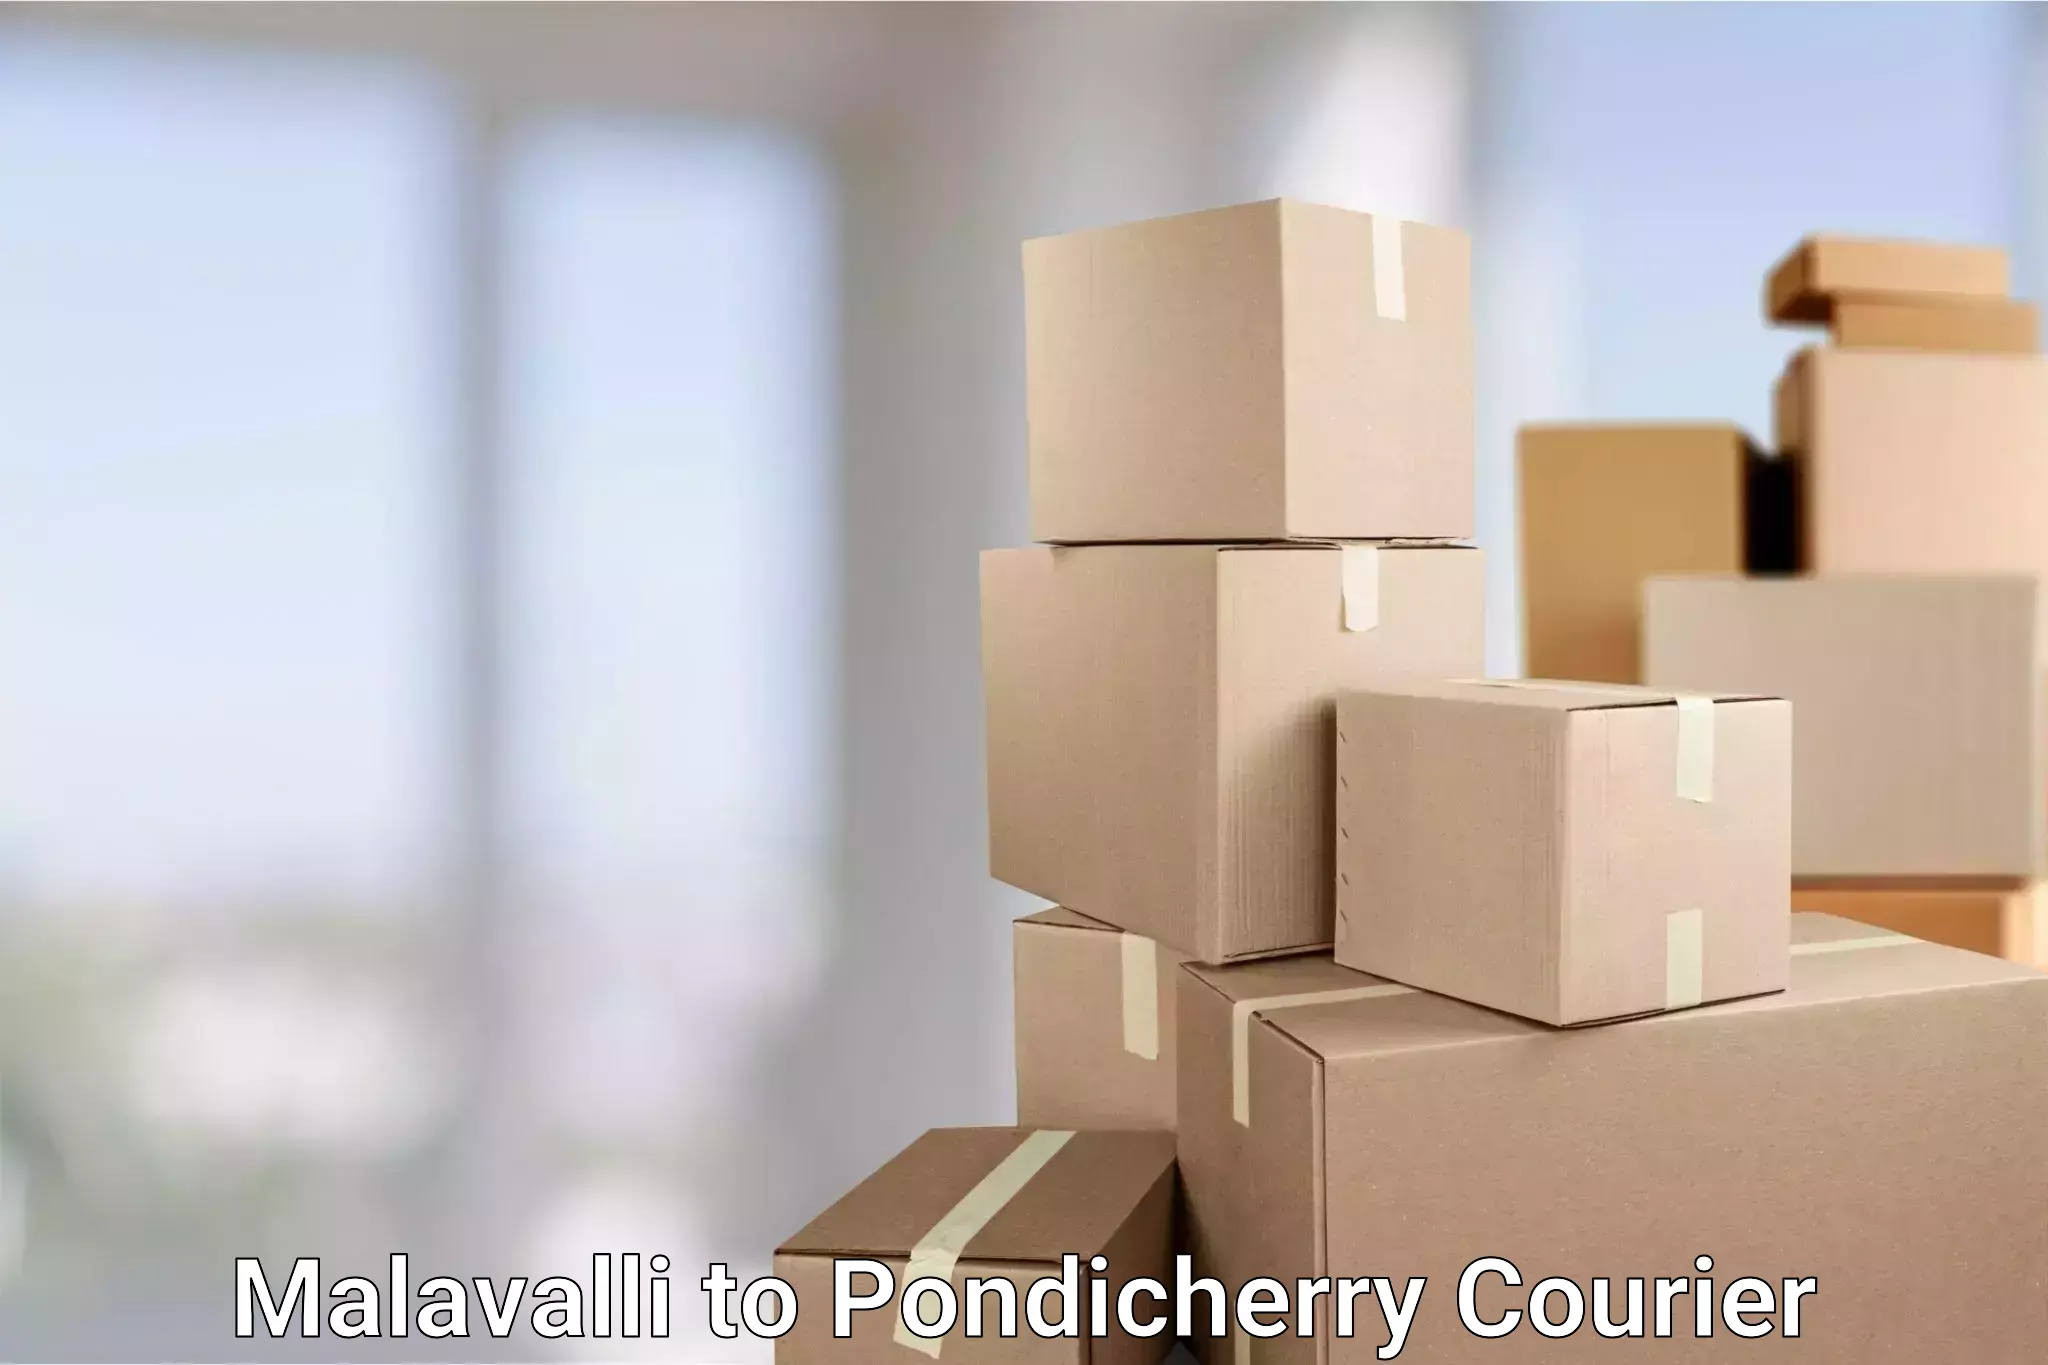 State-of-the-art courier technology Malavalli to Pondicherry